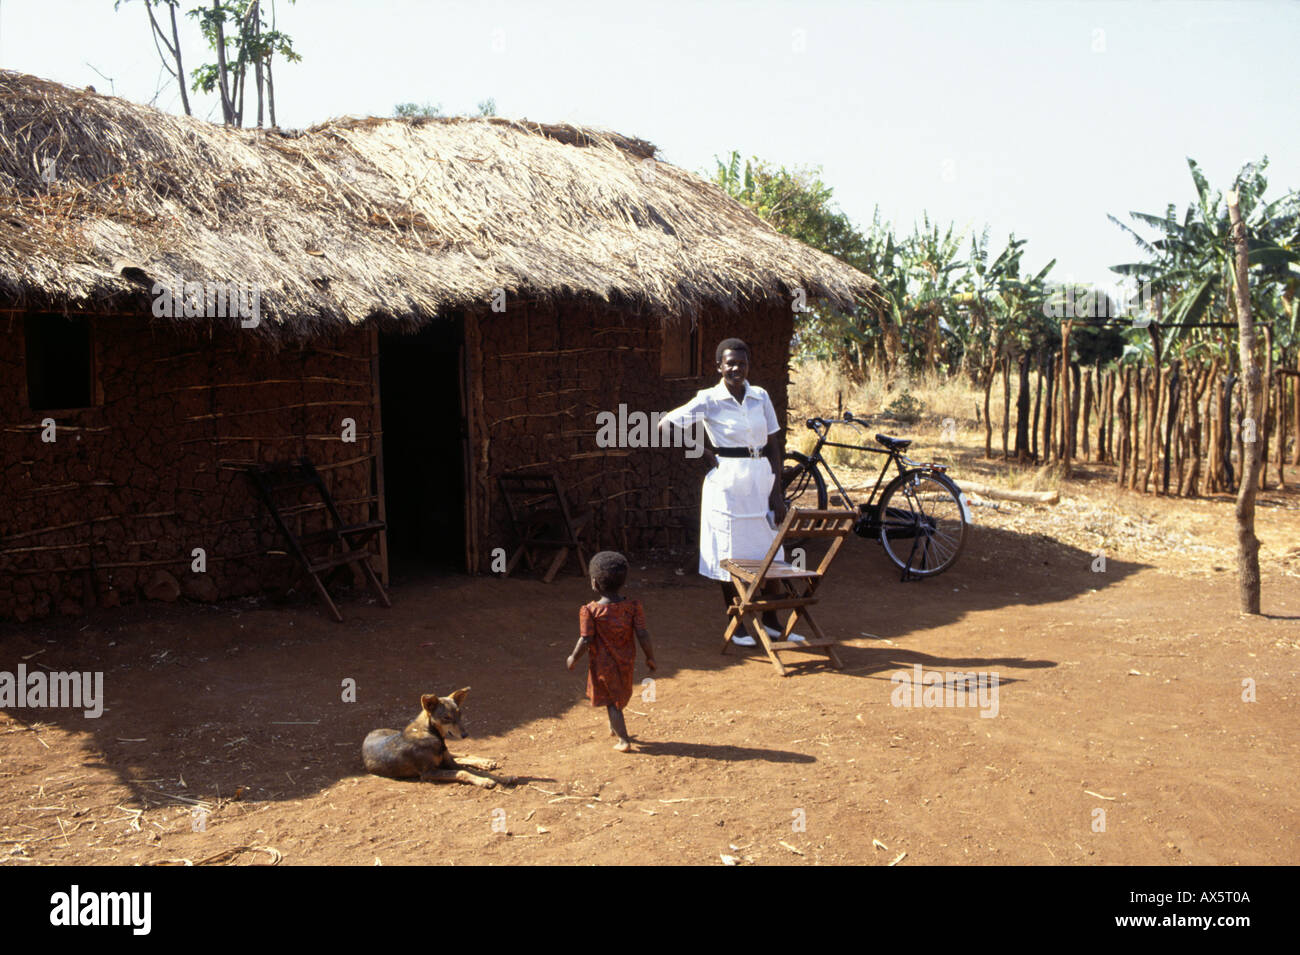 Near Ujiji, Tanzania. District nurse in white uniform with her bicycle outside a mud and thatch hut. Stock Photo